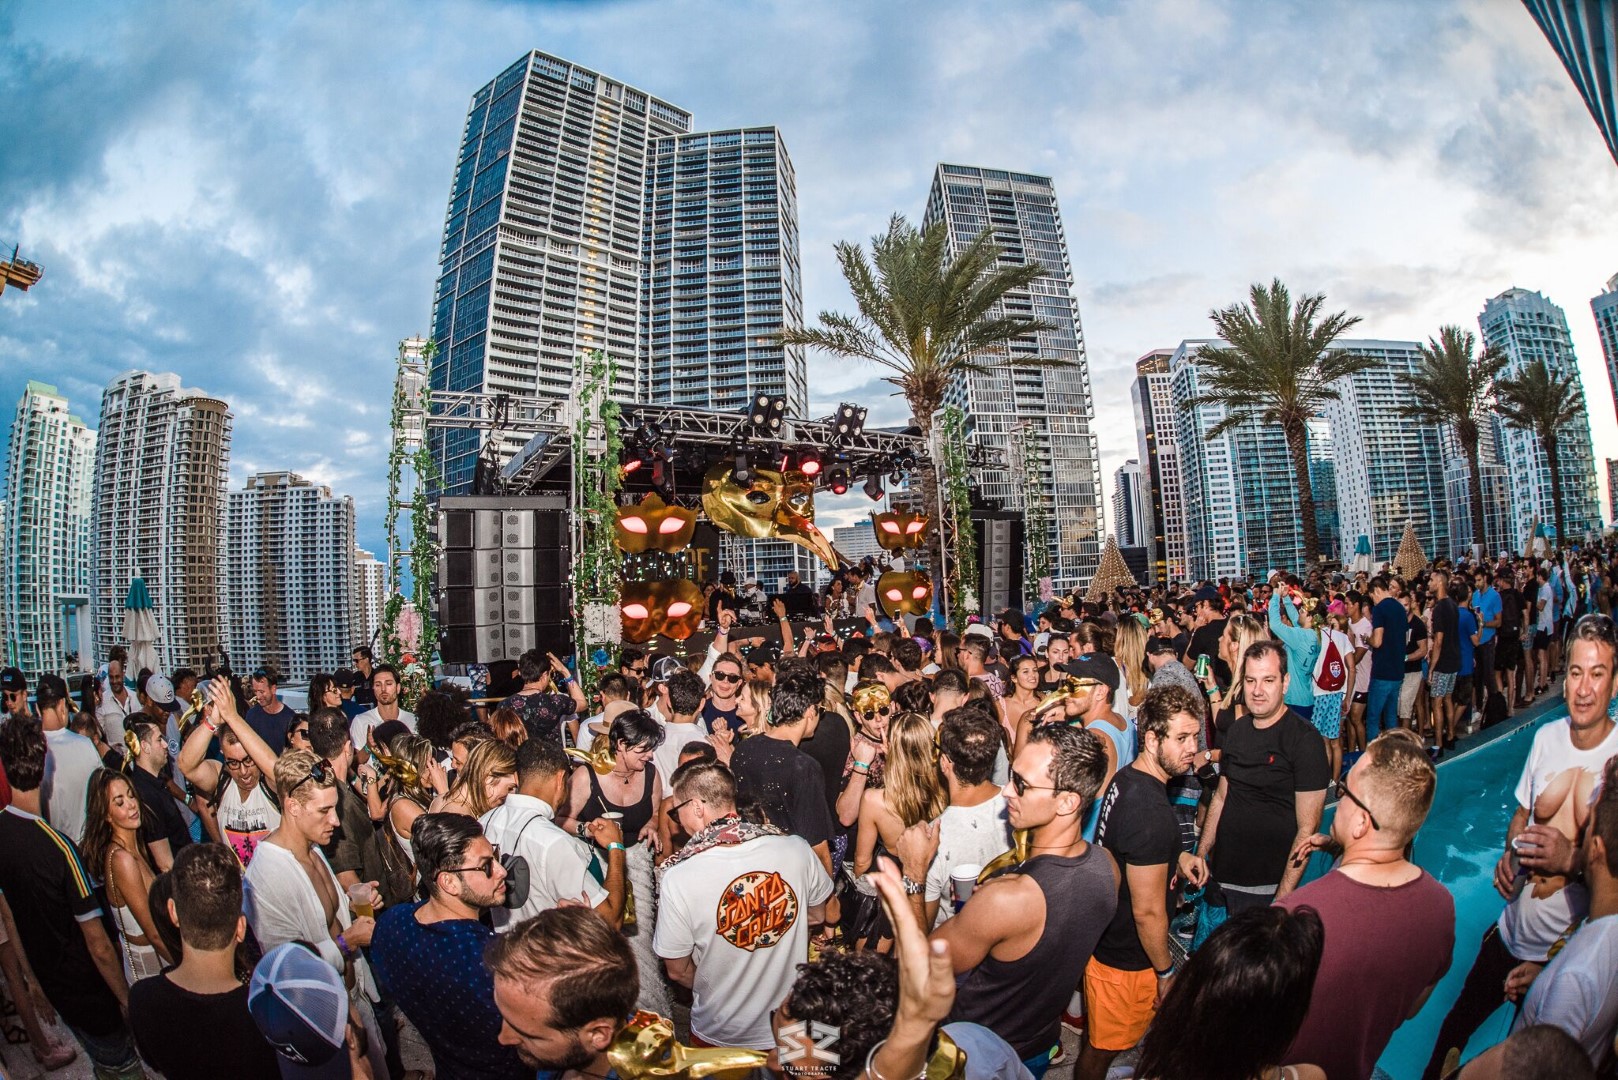 Miami Music Week 2022 Guide: Clubs, Pool Parties, Showcases and More -   - The Latest Electronic Dance Music News, Reviews & Artists